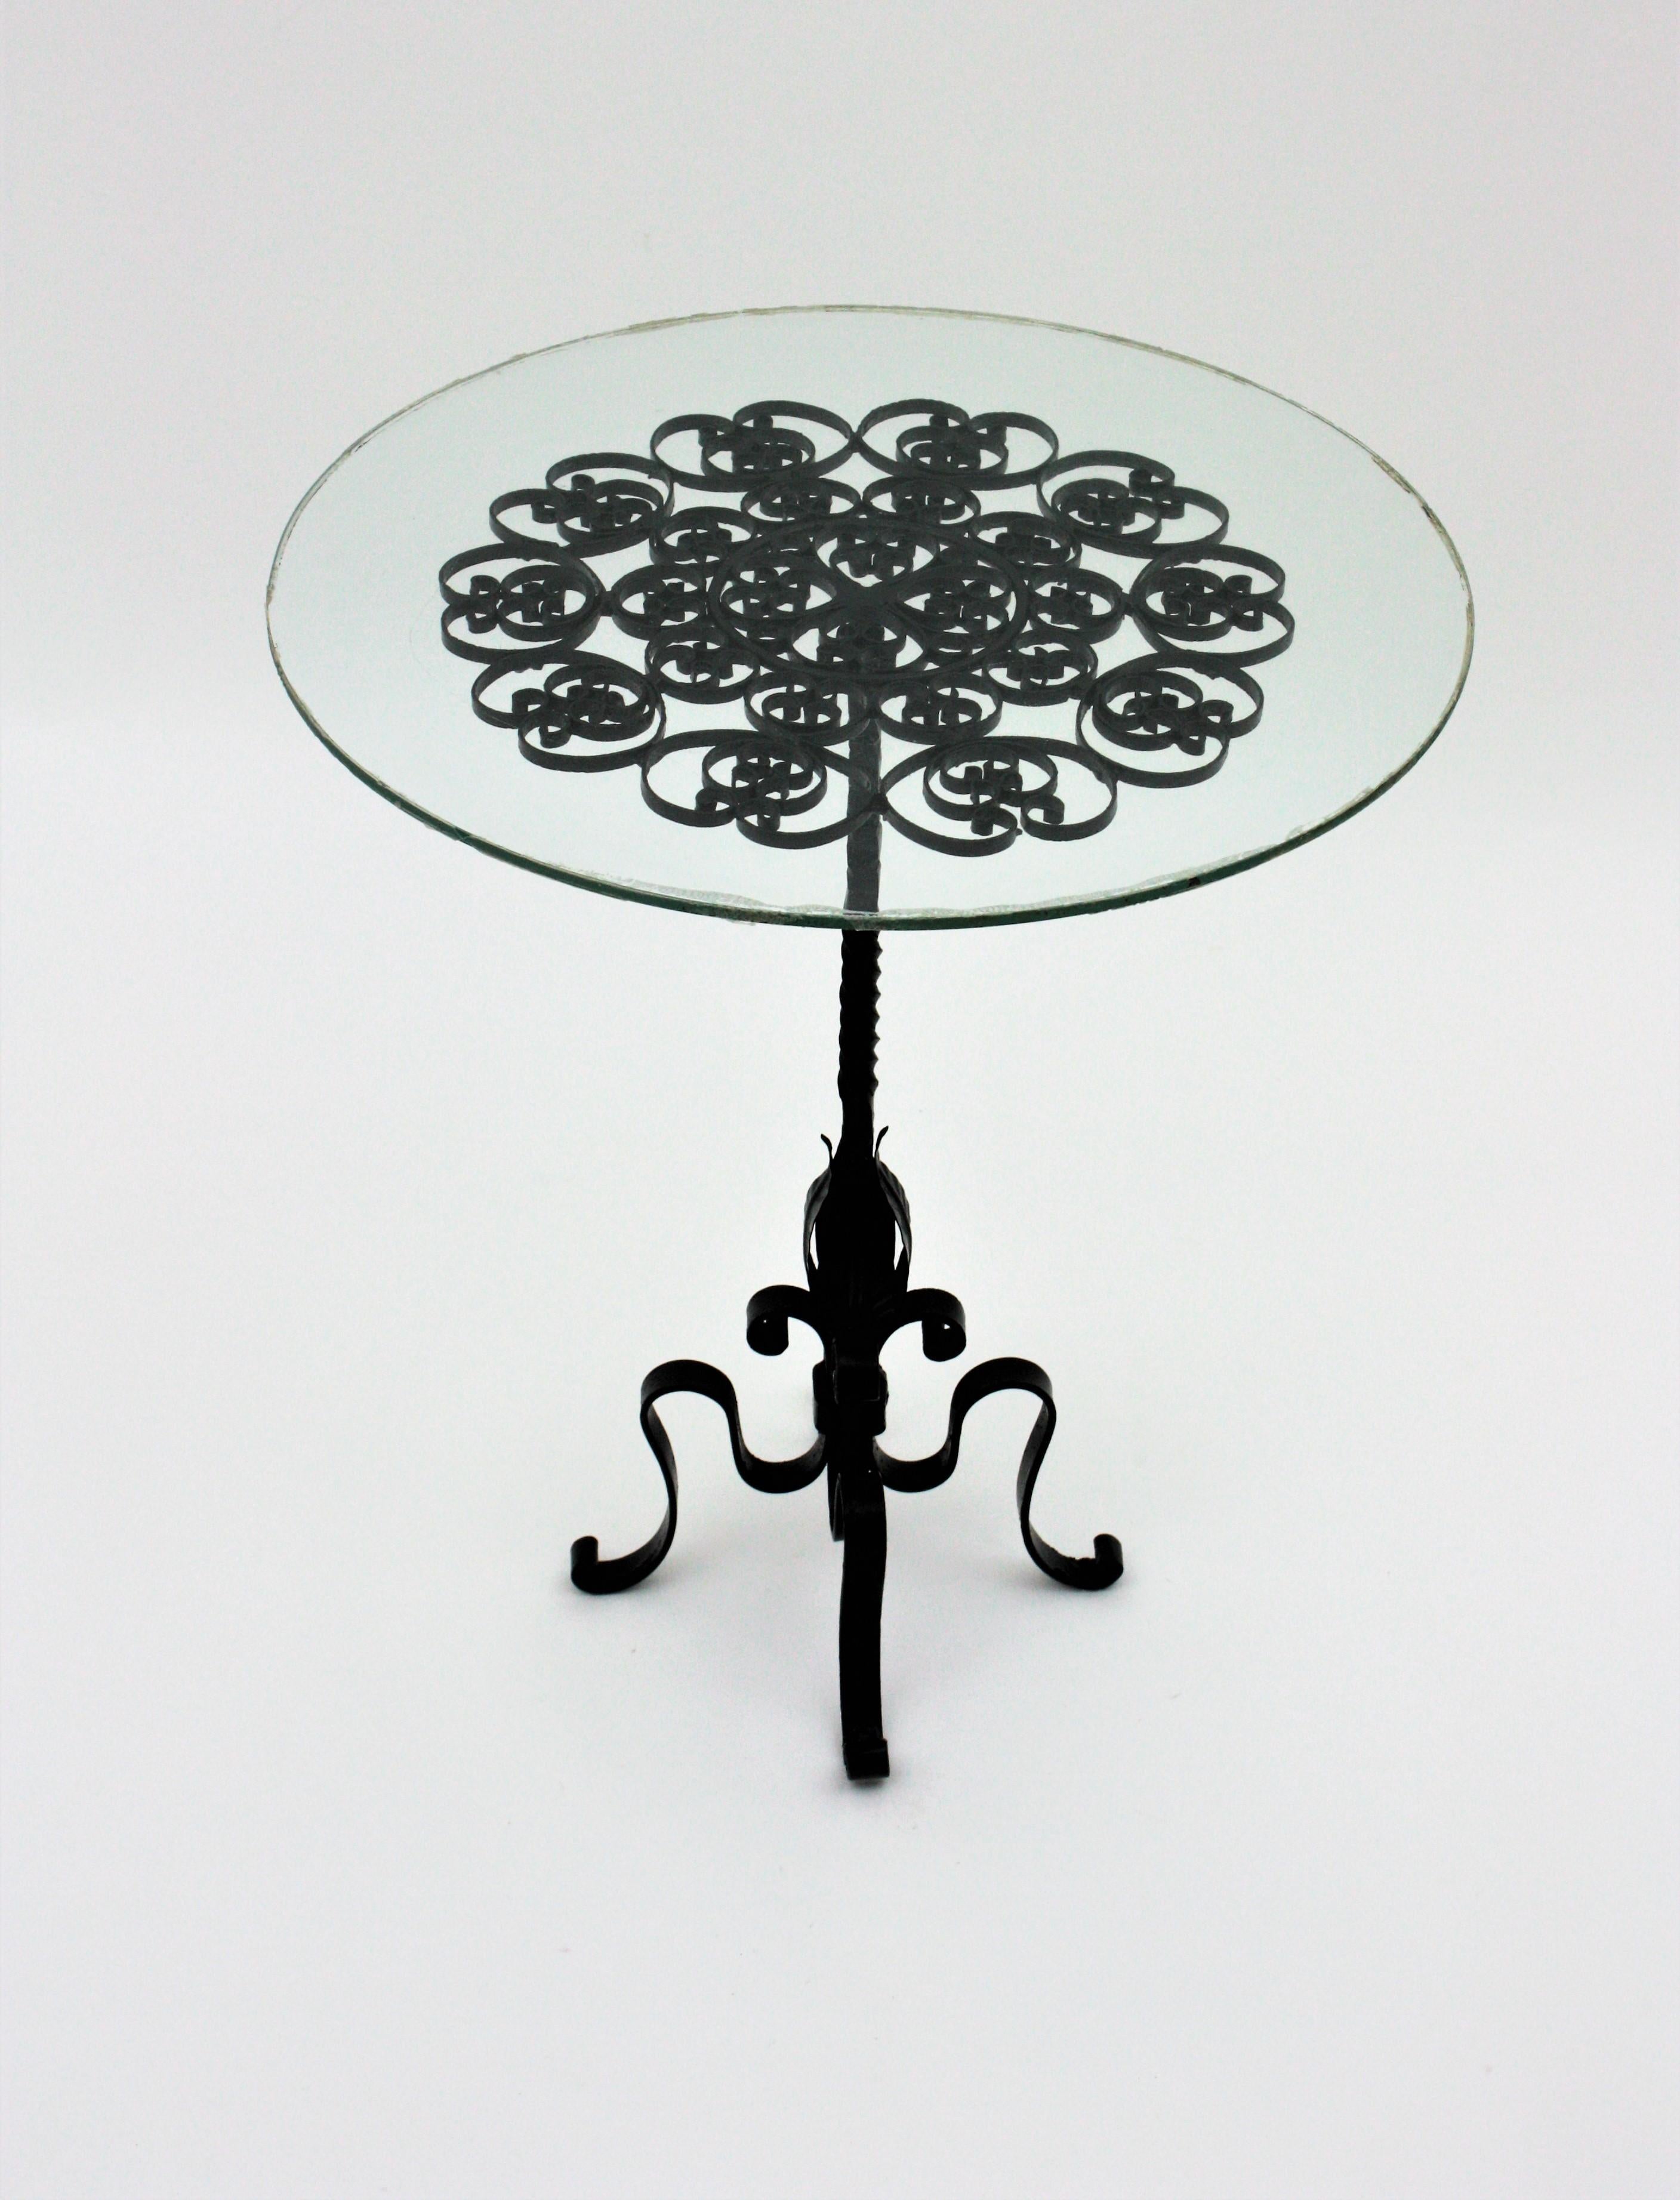 Mid-Century Modern Black Wrought Iron Pedestal Drinks Table with Scrollwork Top